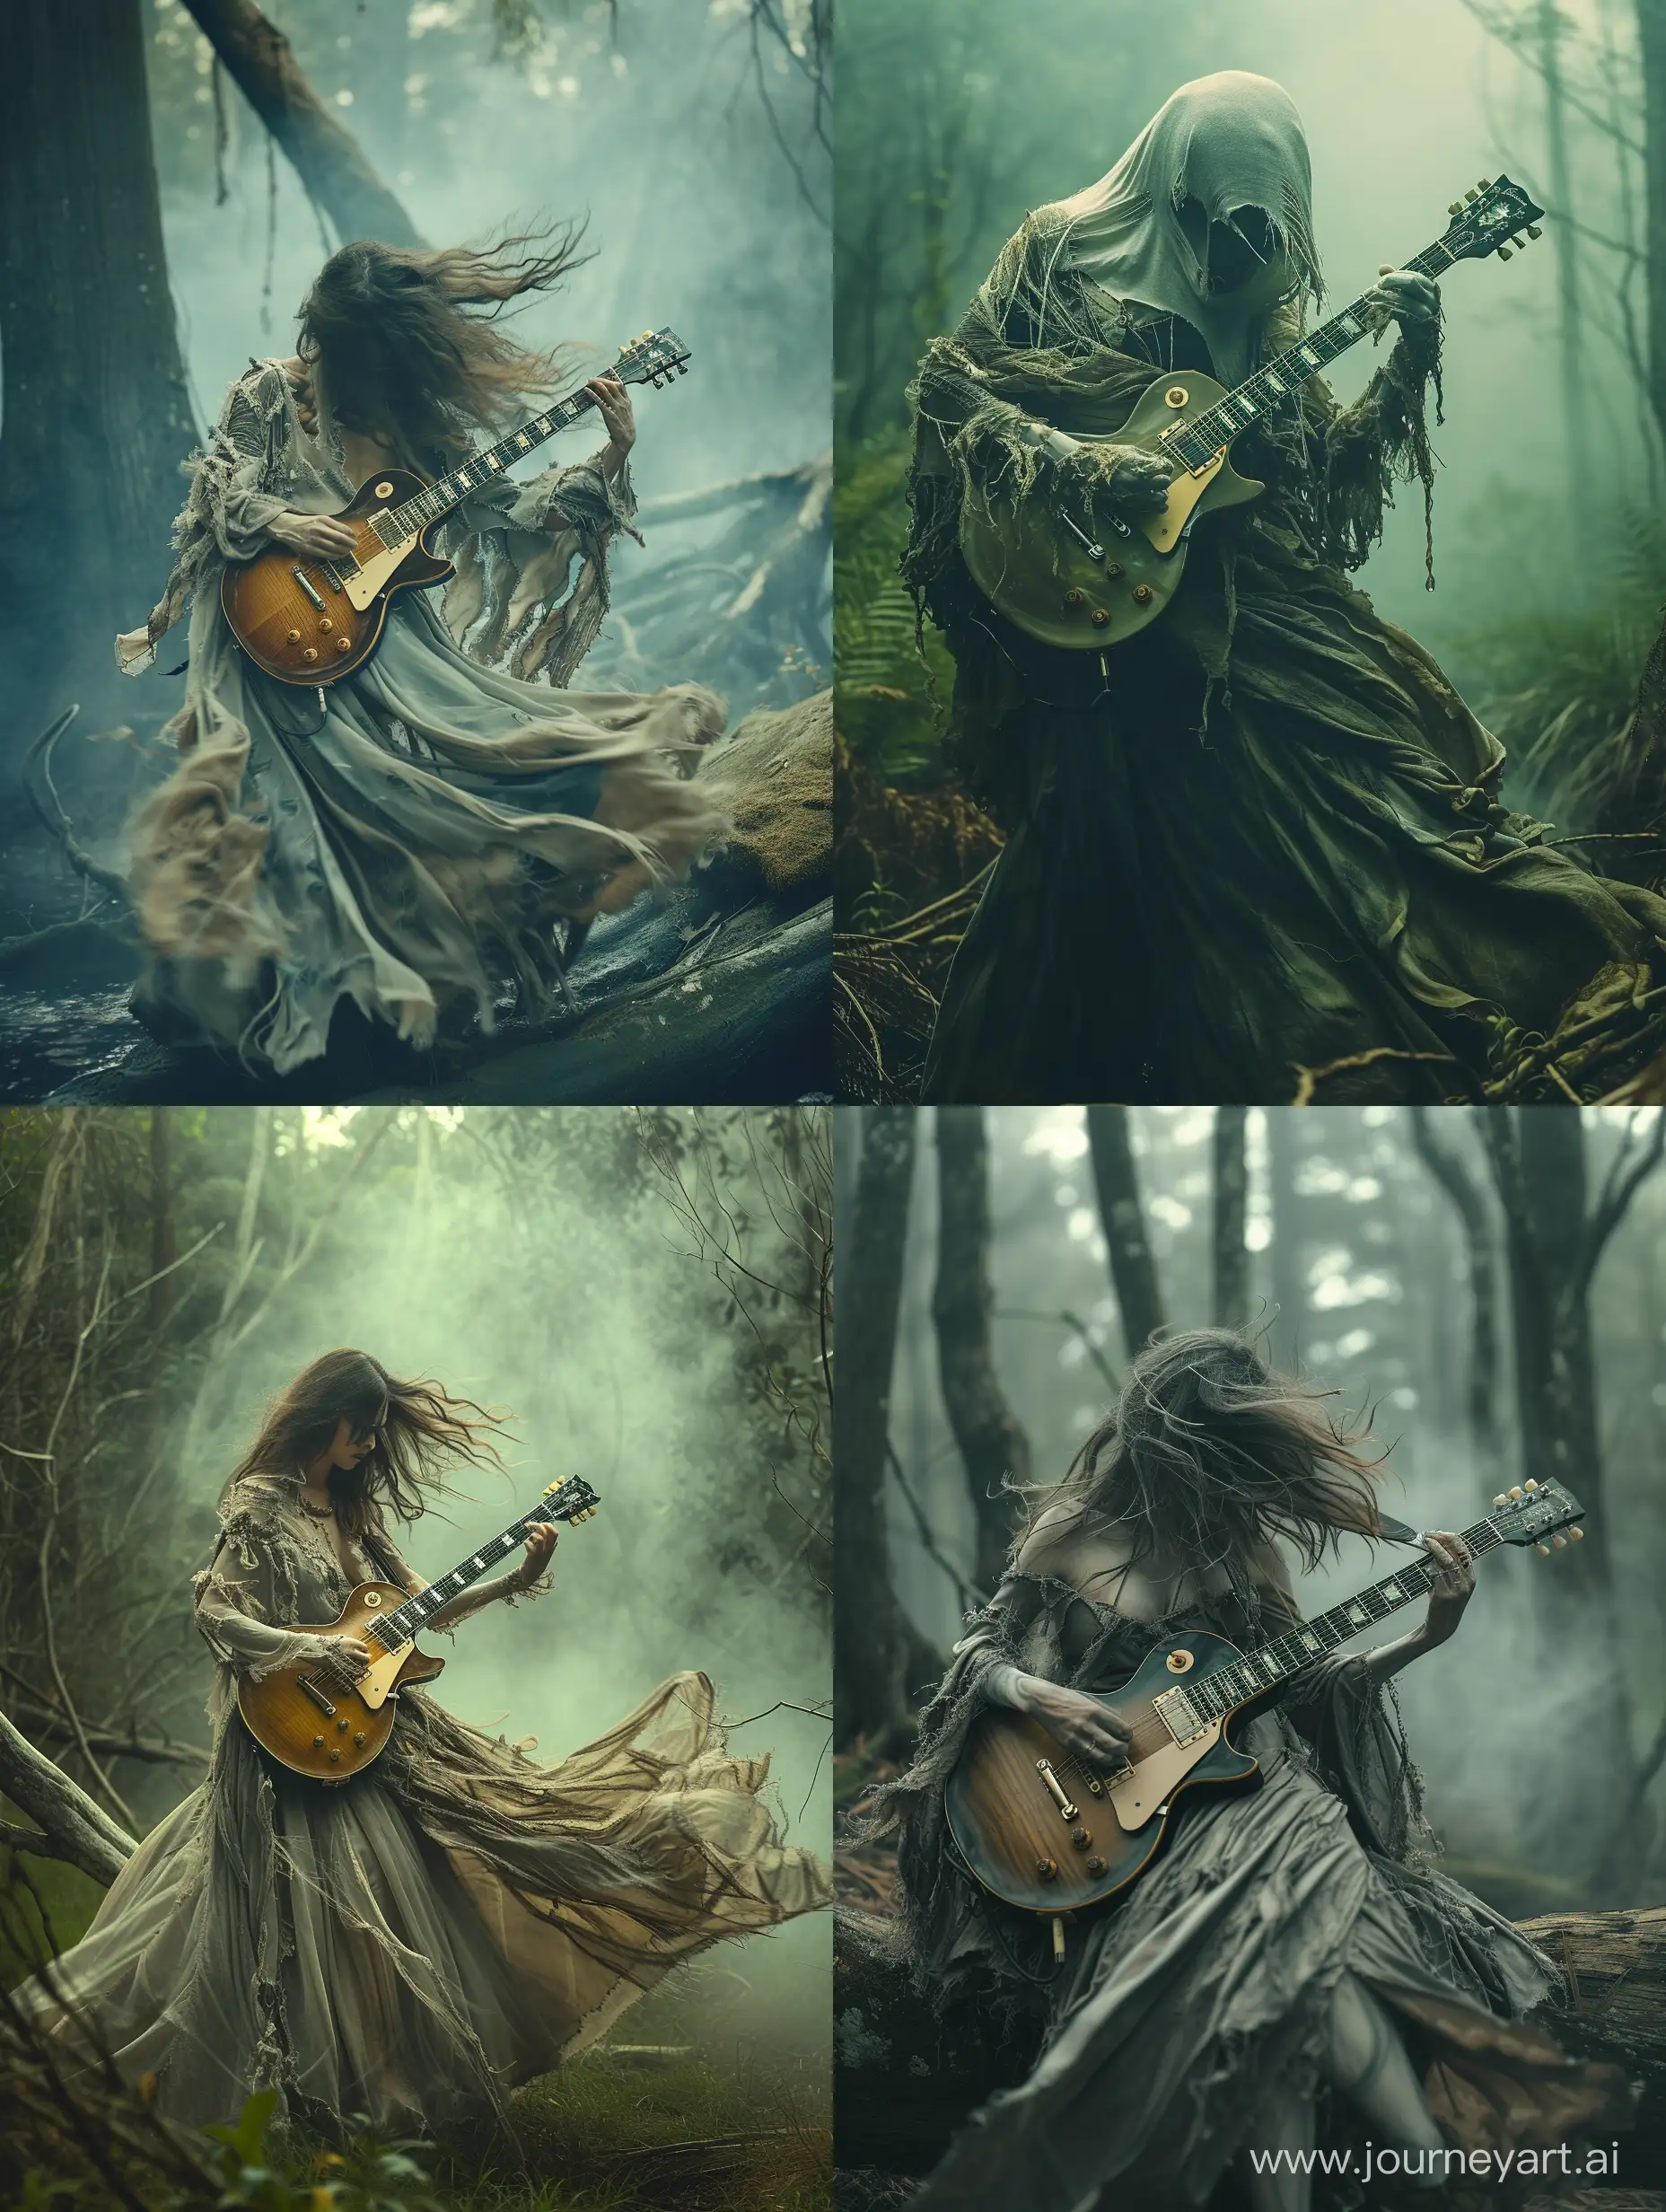 Ephemeral, ghostly apparitions of a beautiful spectral woman, dressed in flowing, tattered garments playing a guitar Gibson Les Paul Custom in a creepy misty forest, attention to detail, taken on provia 